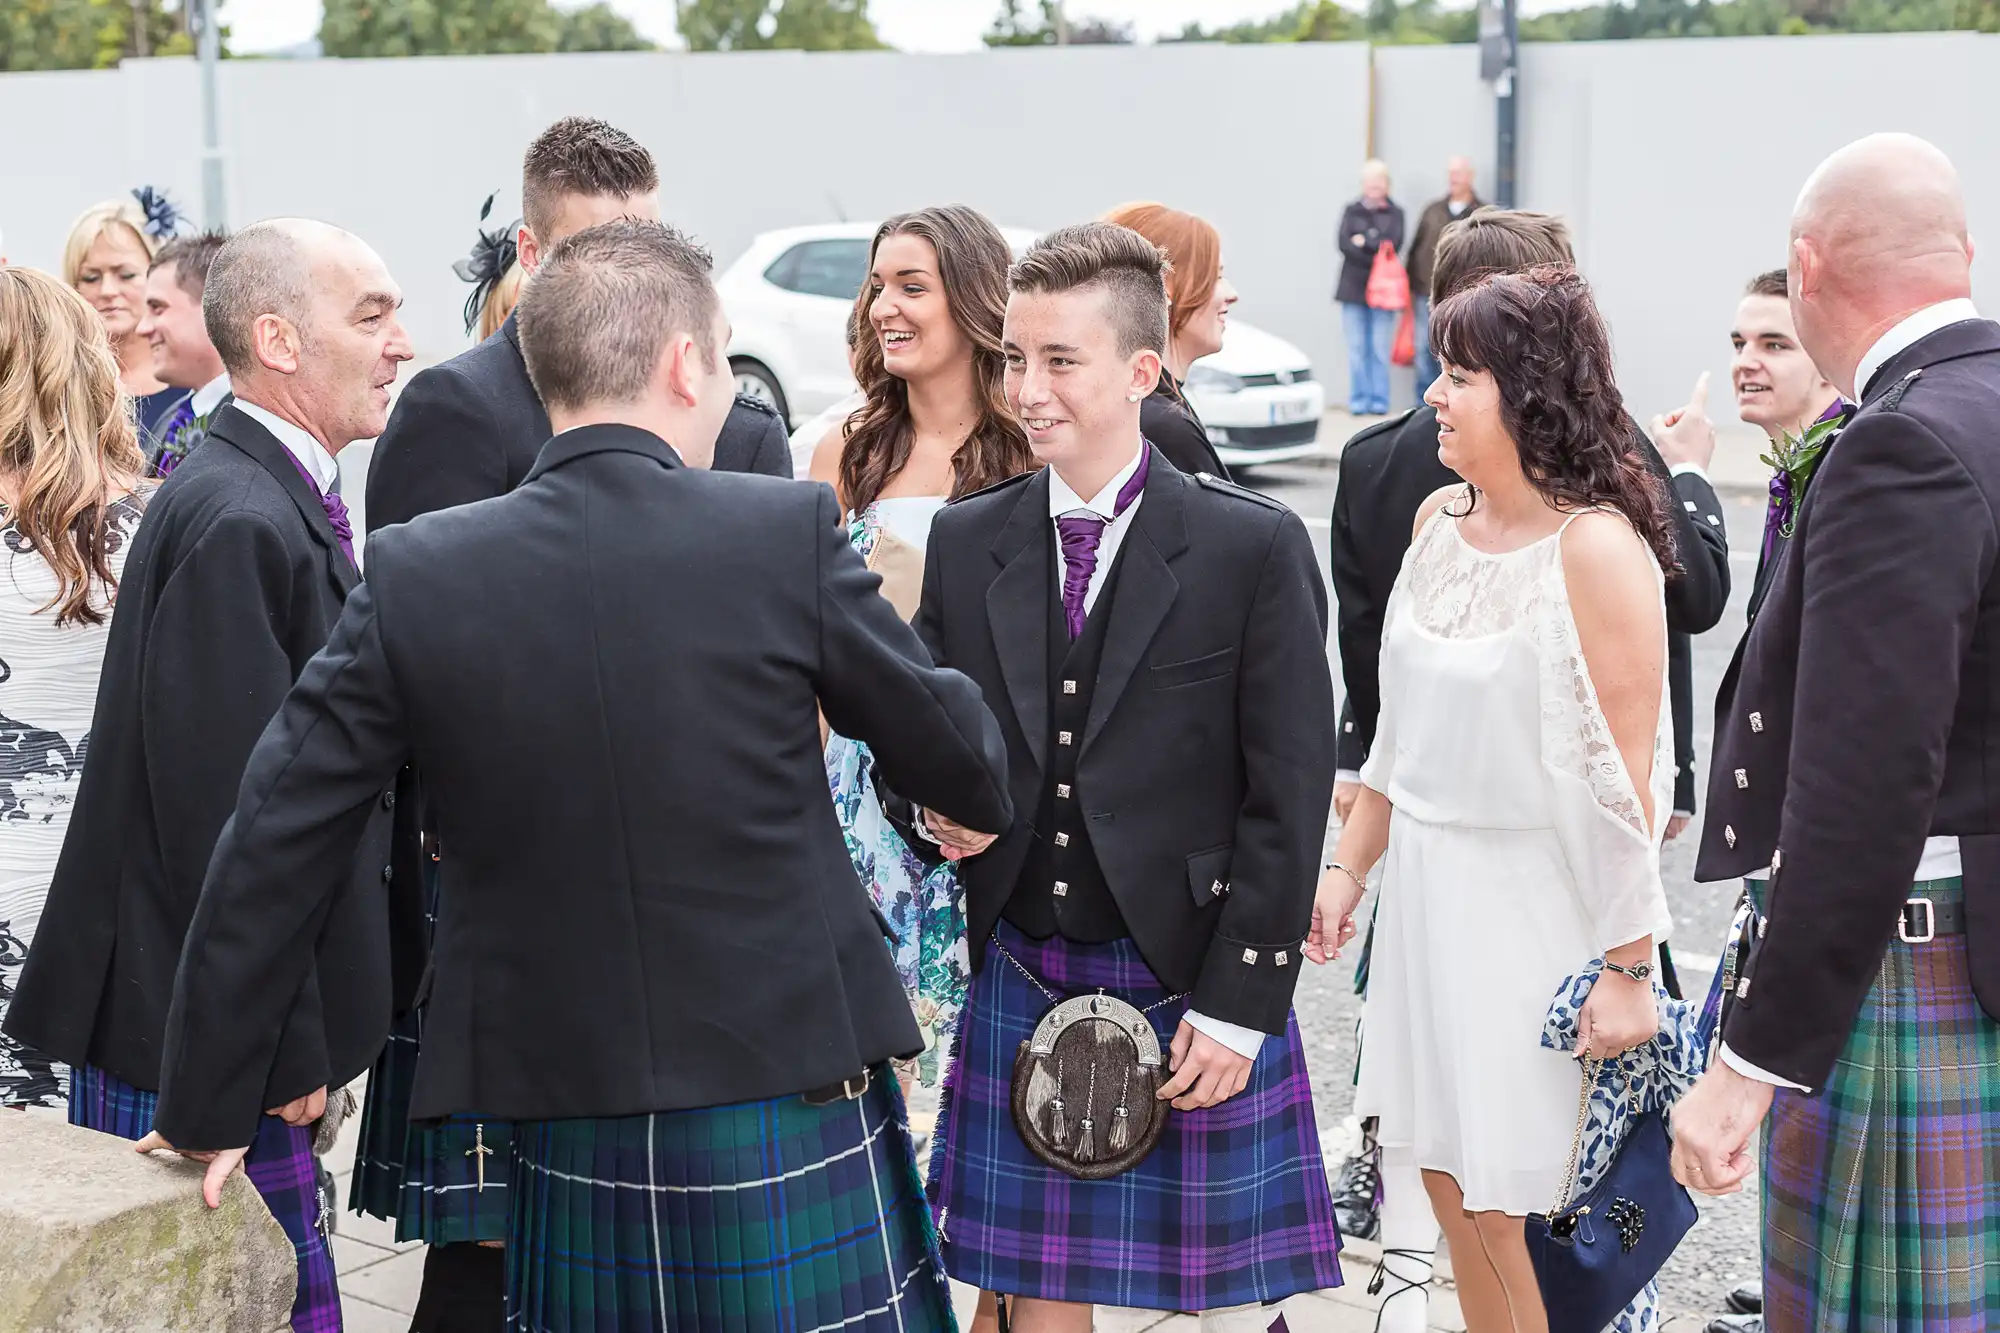 Group of people in formal attire, including kilts, gathered in a parking lot, greeting each other with handshakes and smiles.